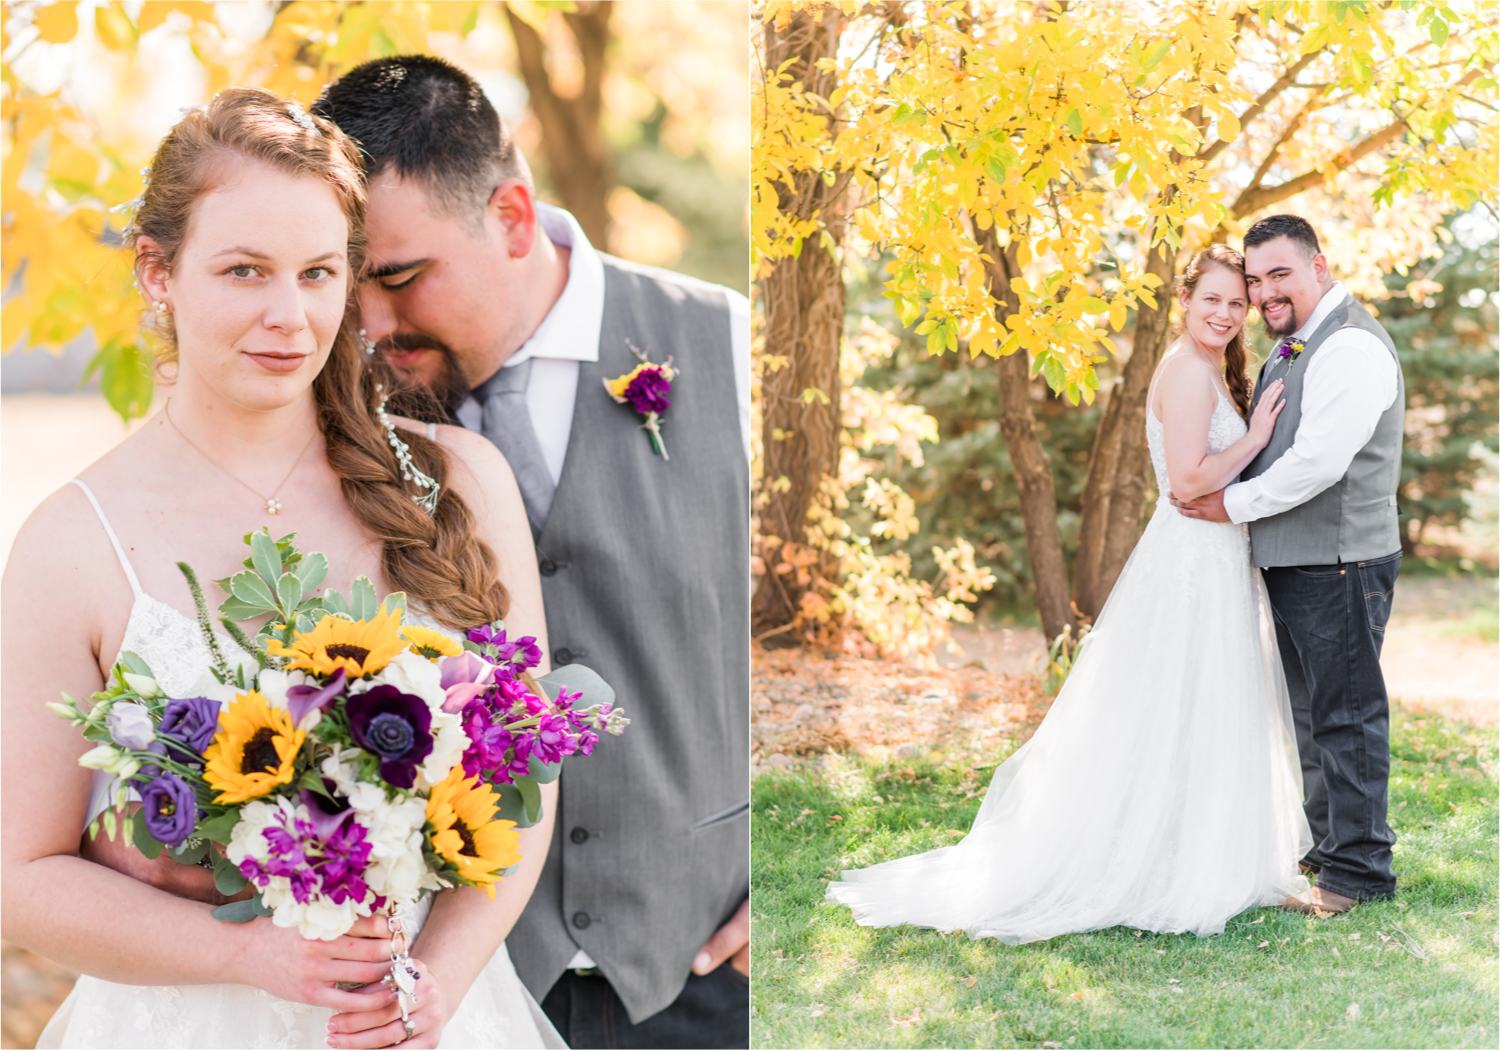 Rustic Fall Wedding at country home overlooking longs peak | Britni Girard Photography | Colorado Wedding Photography and Videography team | Fall colors, country fences leading to mountain views | Relaxed DIY wedding with elegant charm | Florals by Tahnee Wydra | Brides Dress from Abeille Bridal | Best Event Rentals